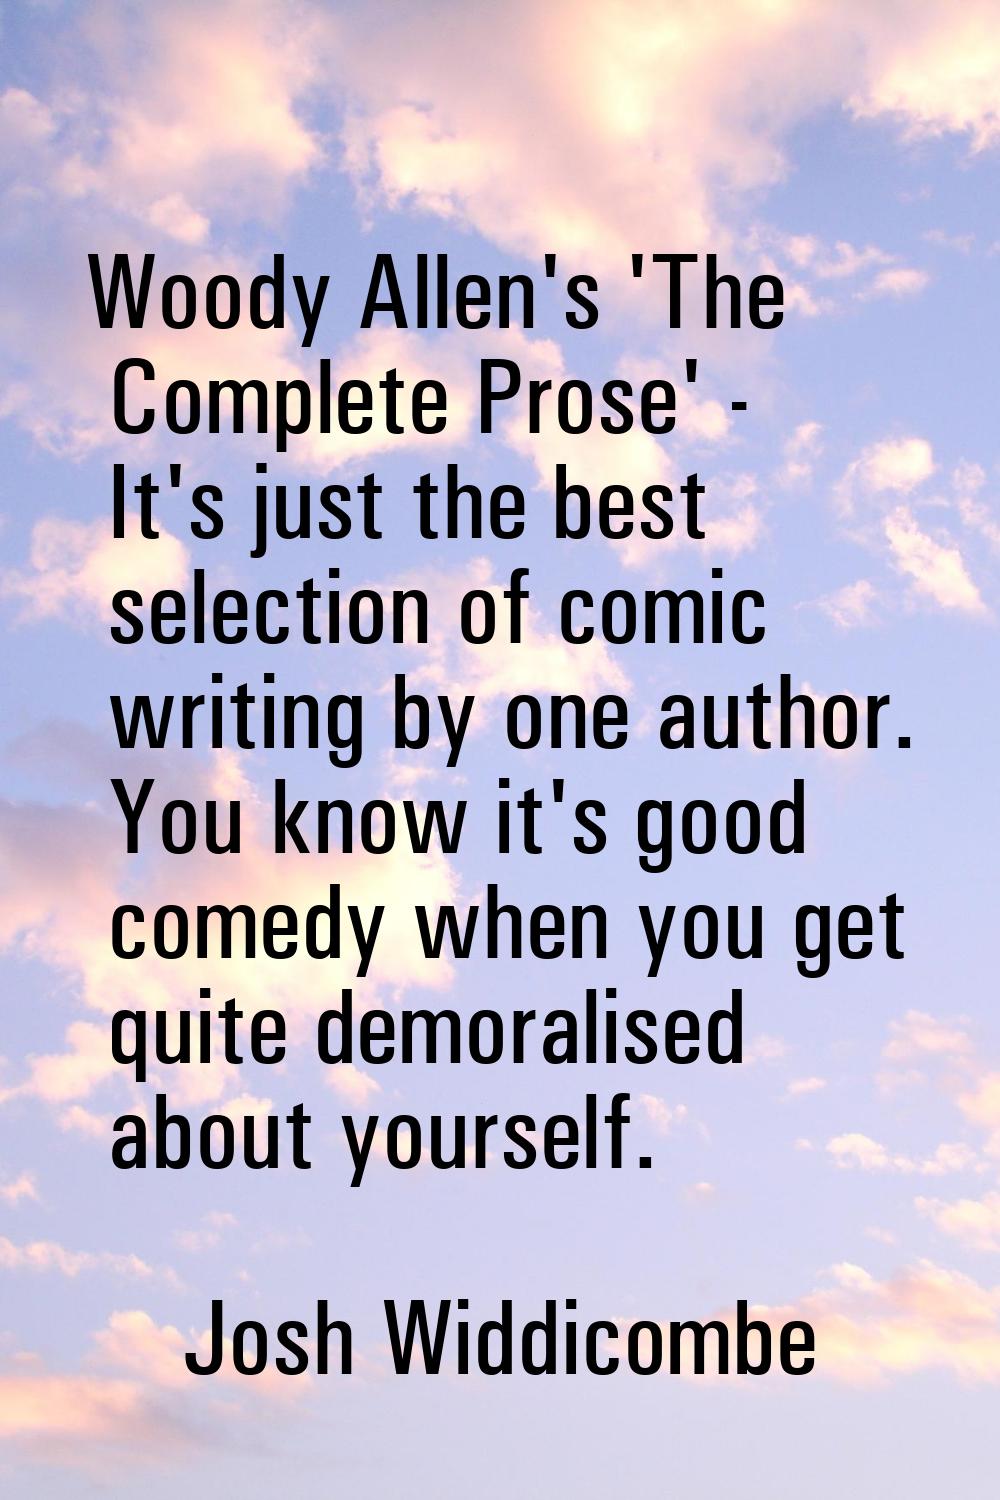 Woody Allen's 'The Complete Prose' - It's just the best selection of comic writing by one author. Y